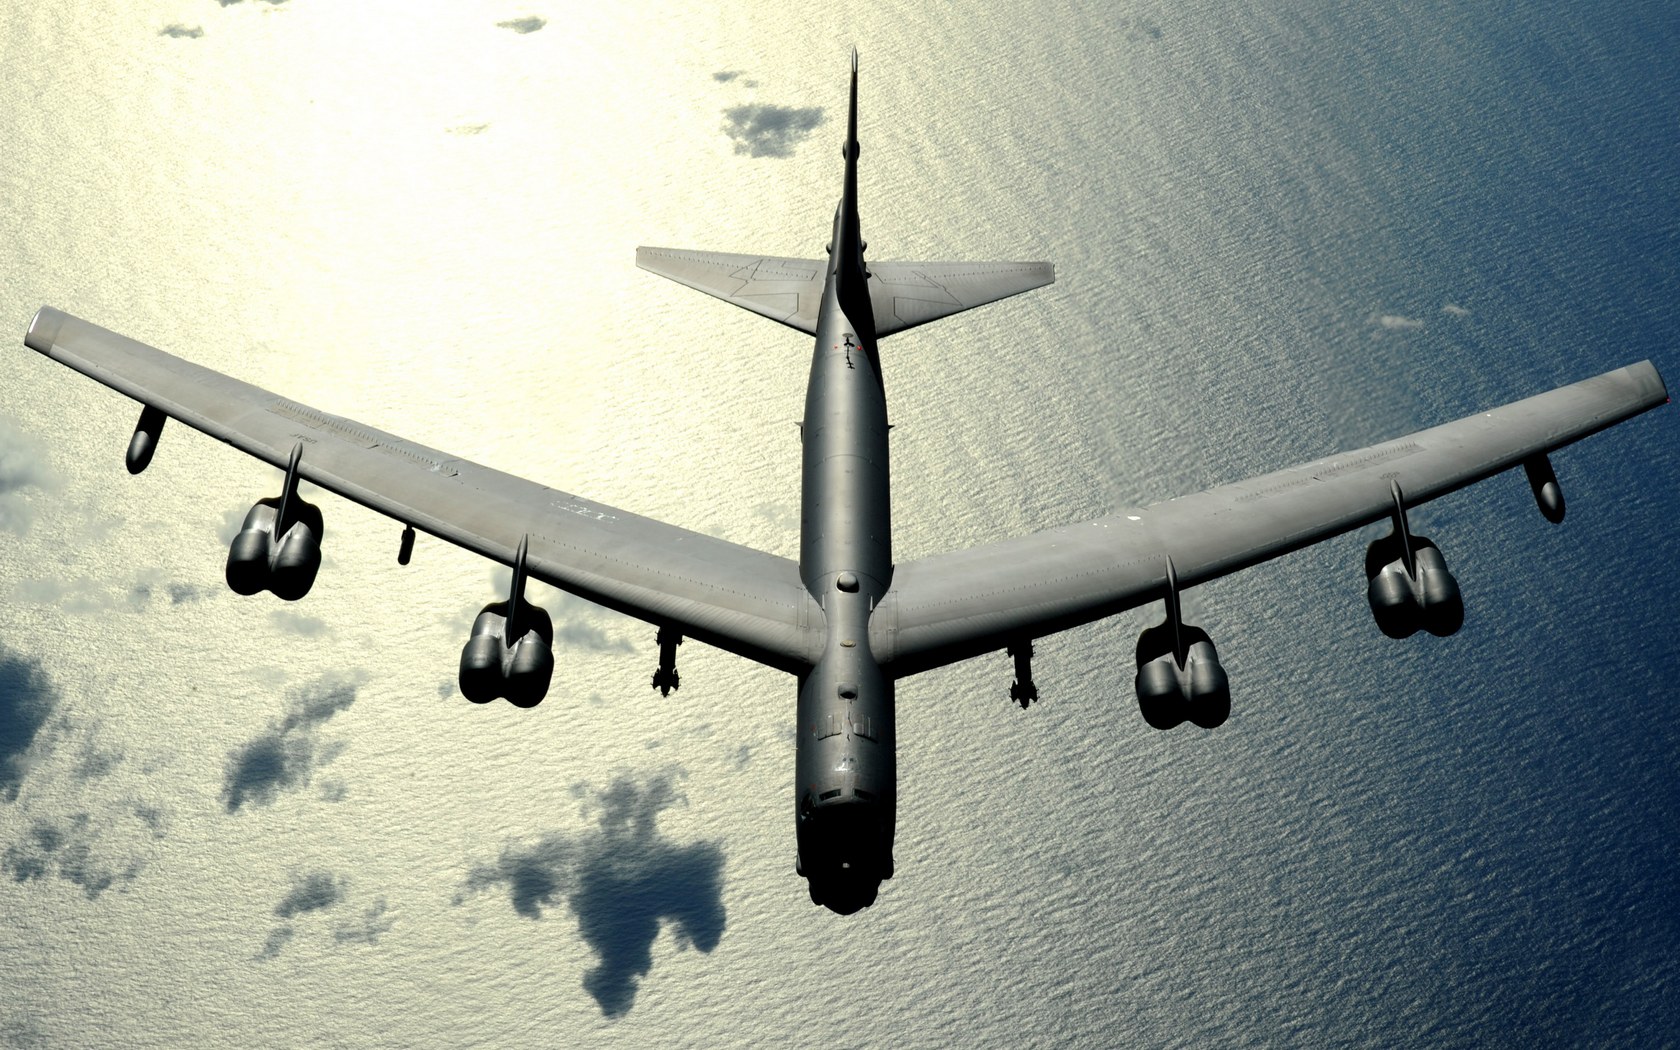 Download HQ B-52 Stratofortress Military Airplanes wallpaper / 1680x1050